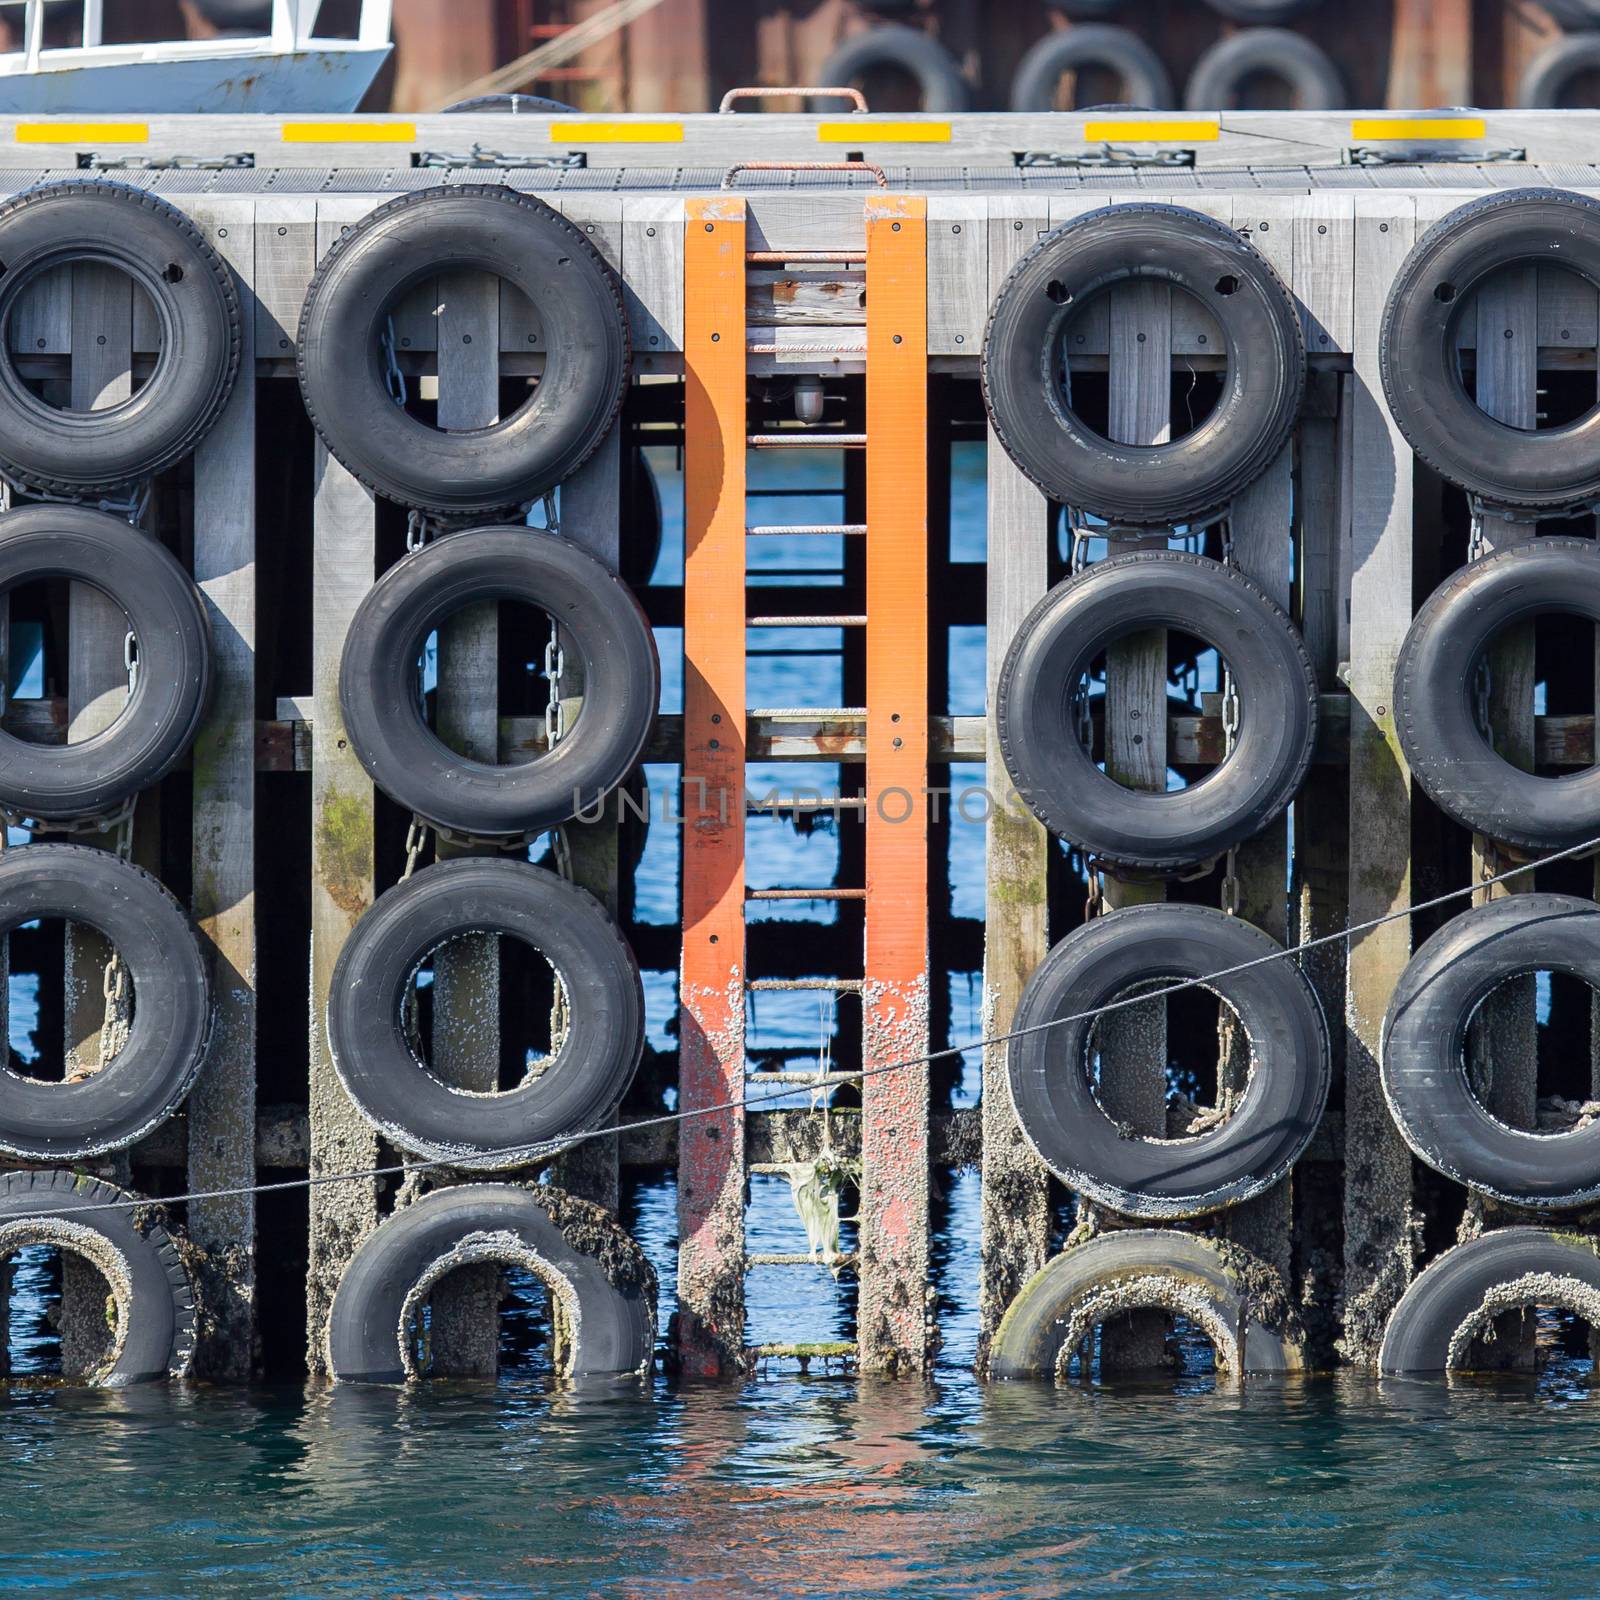 Mooring wall with car tires by michaklootwijk